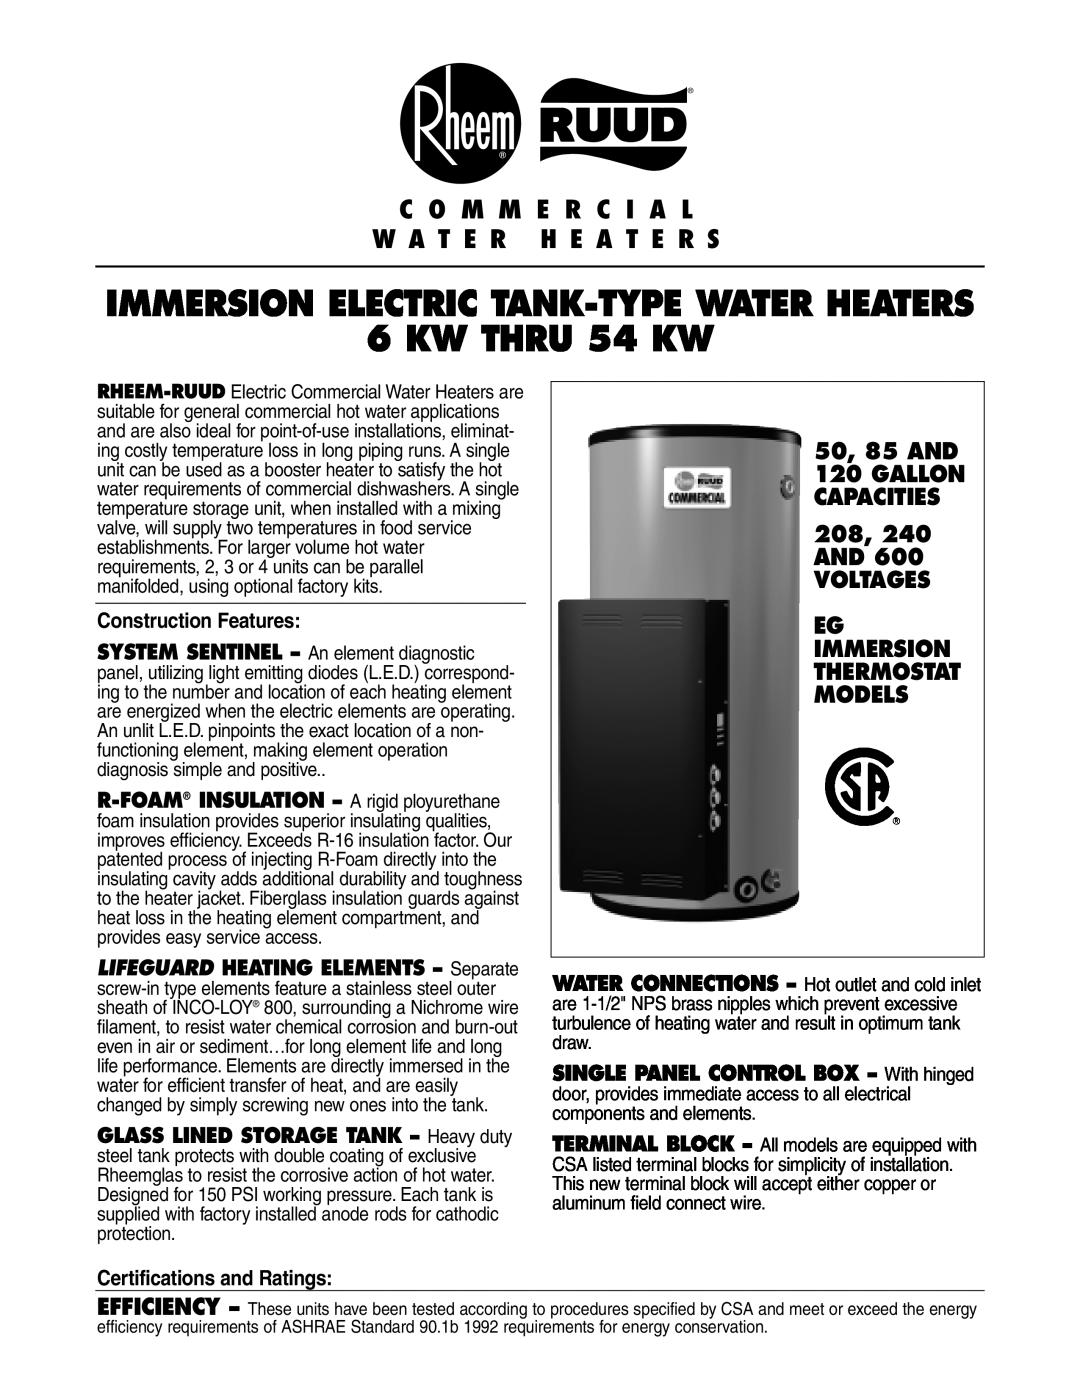 Rheem 6 KW THRU 54 KW manual Construction Features, Certifications and Ratings, Immersion Thermostat Models 